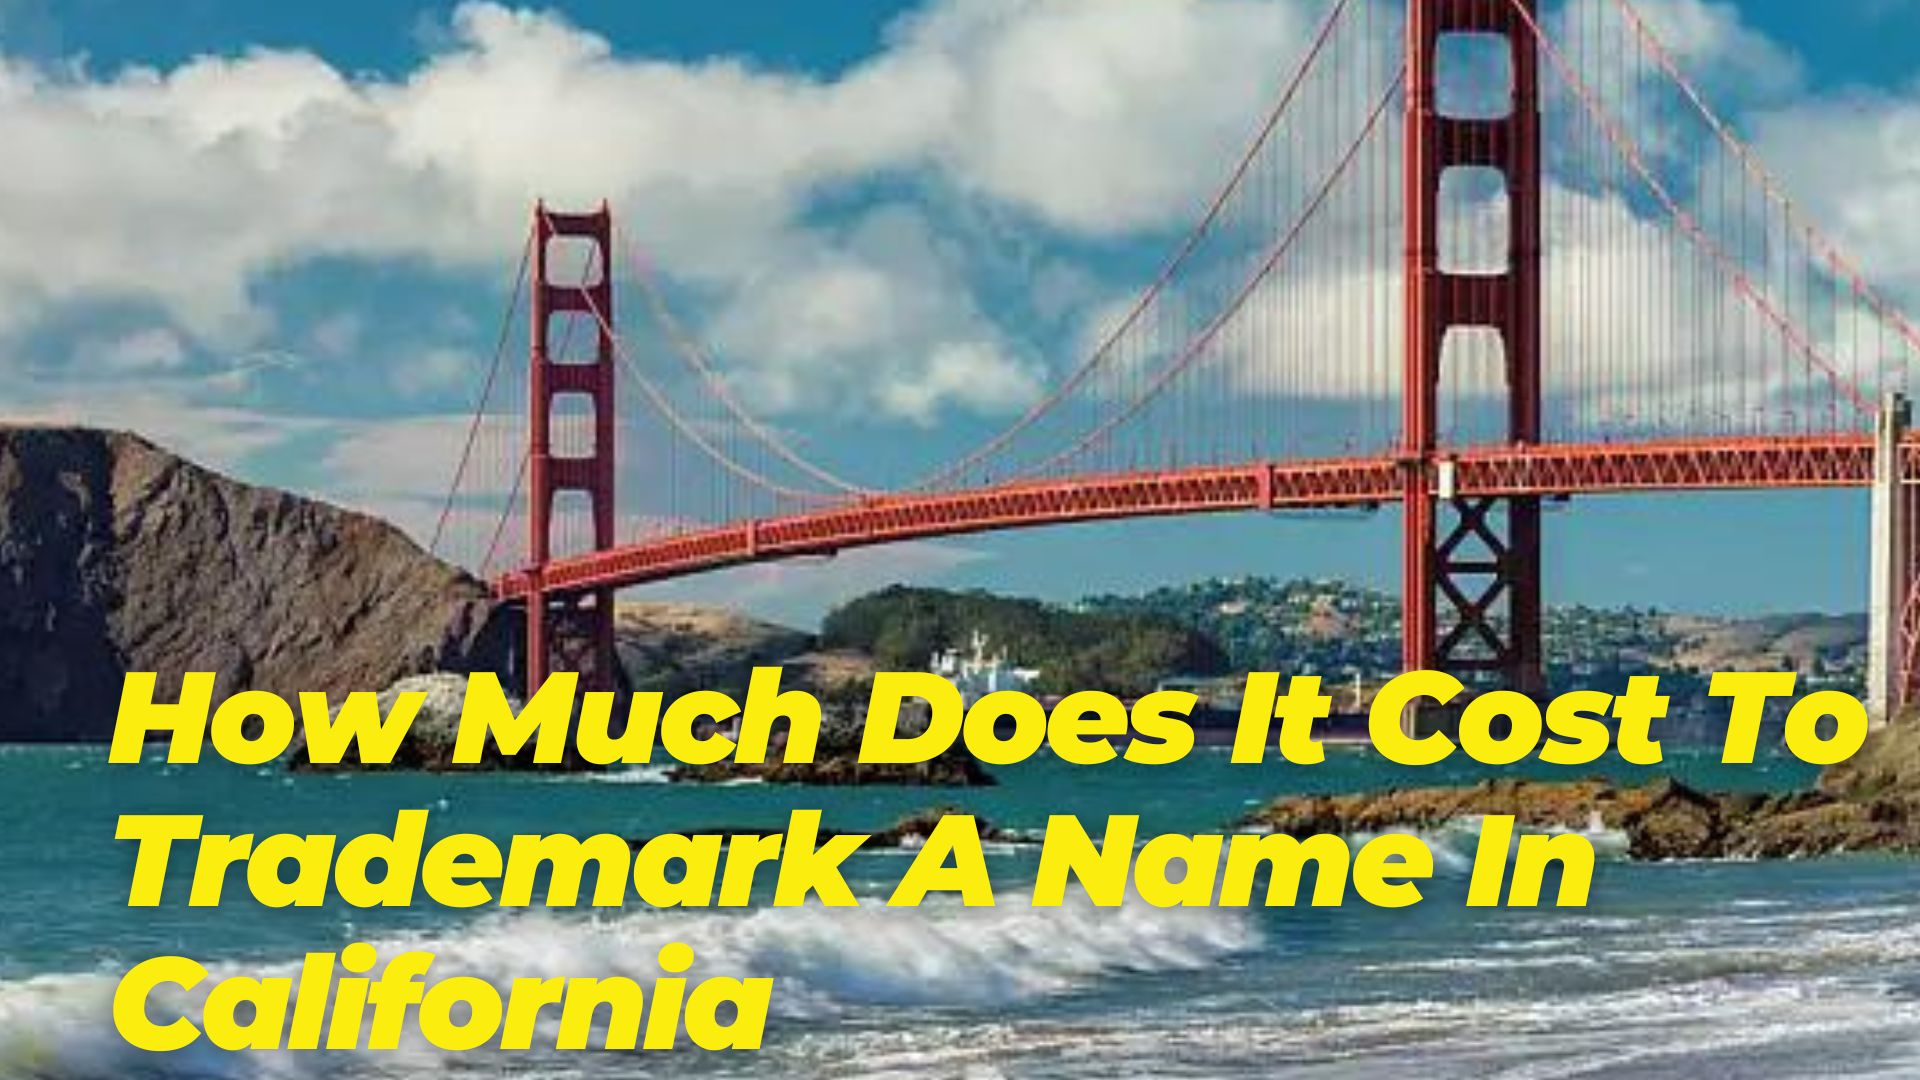 How Much Does It Cost To Trademark A Name In California